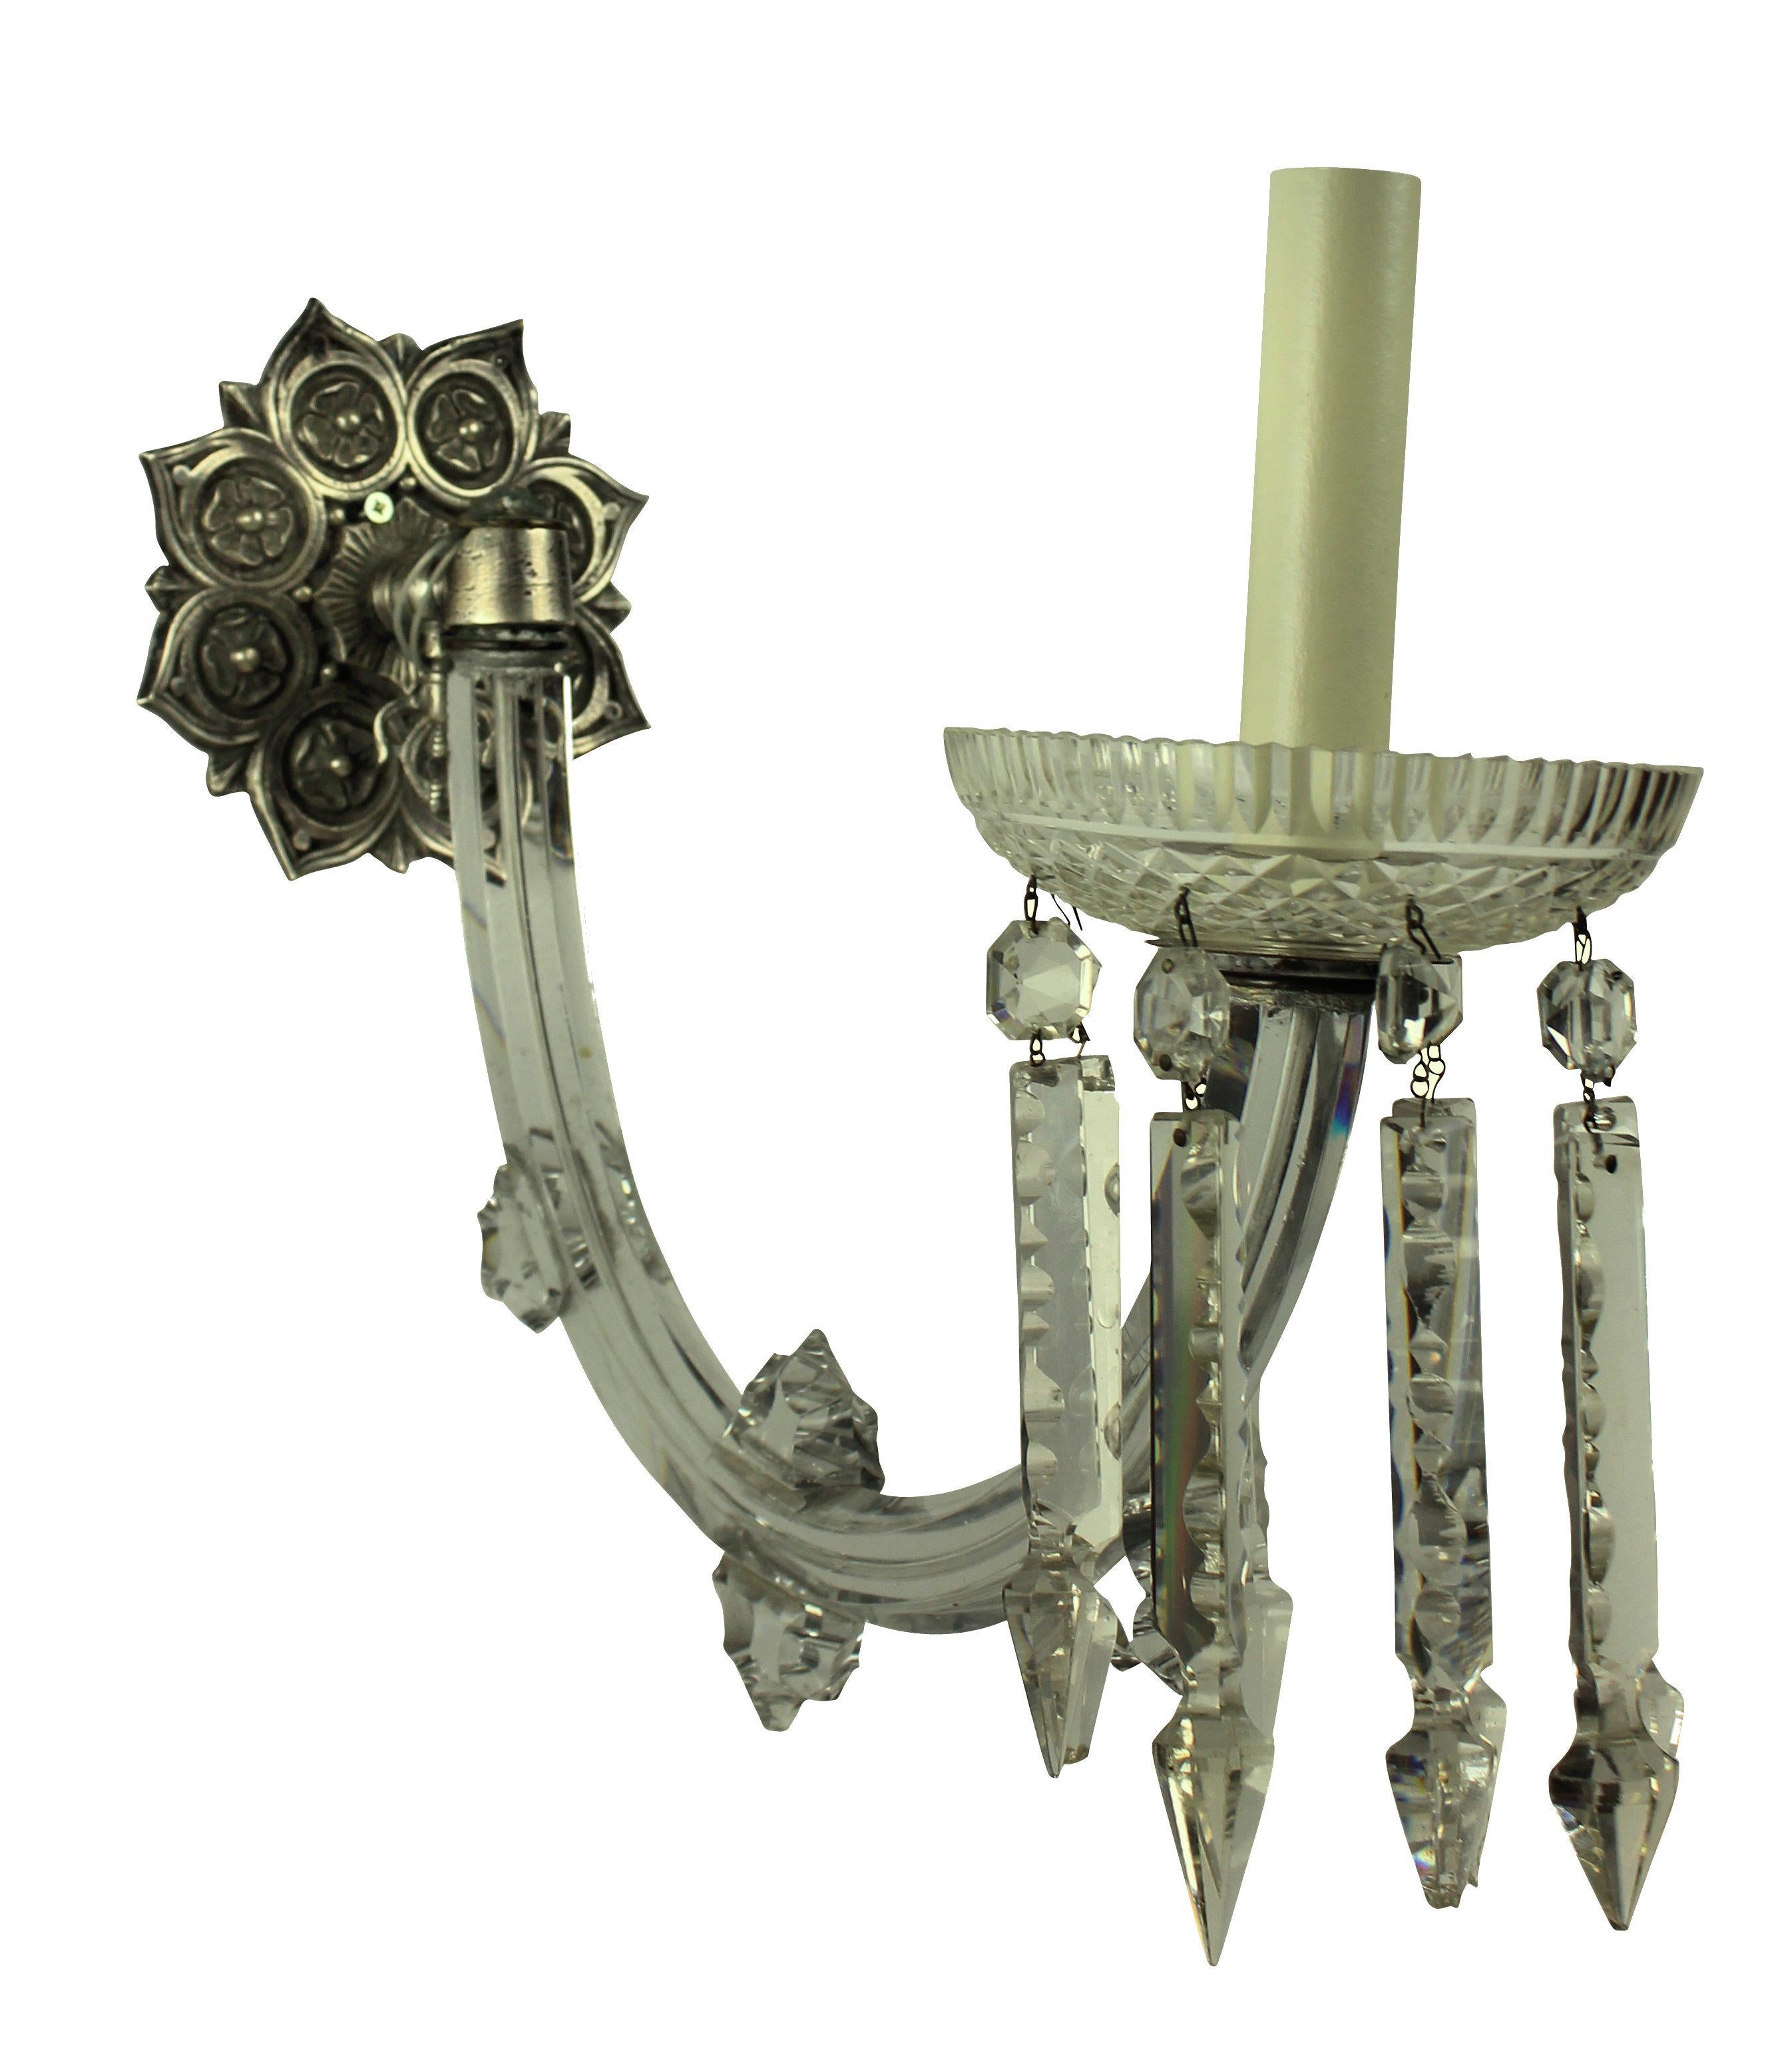 A pair of good quality English single arm sconces, with large up-swept handcut glass arms with decorative glass finials and a finely cut dish with pendants. The metal work of silvered bronze.